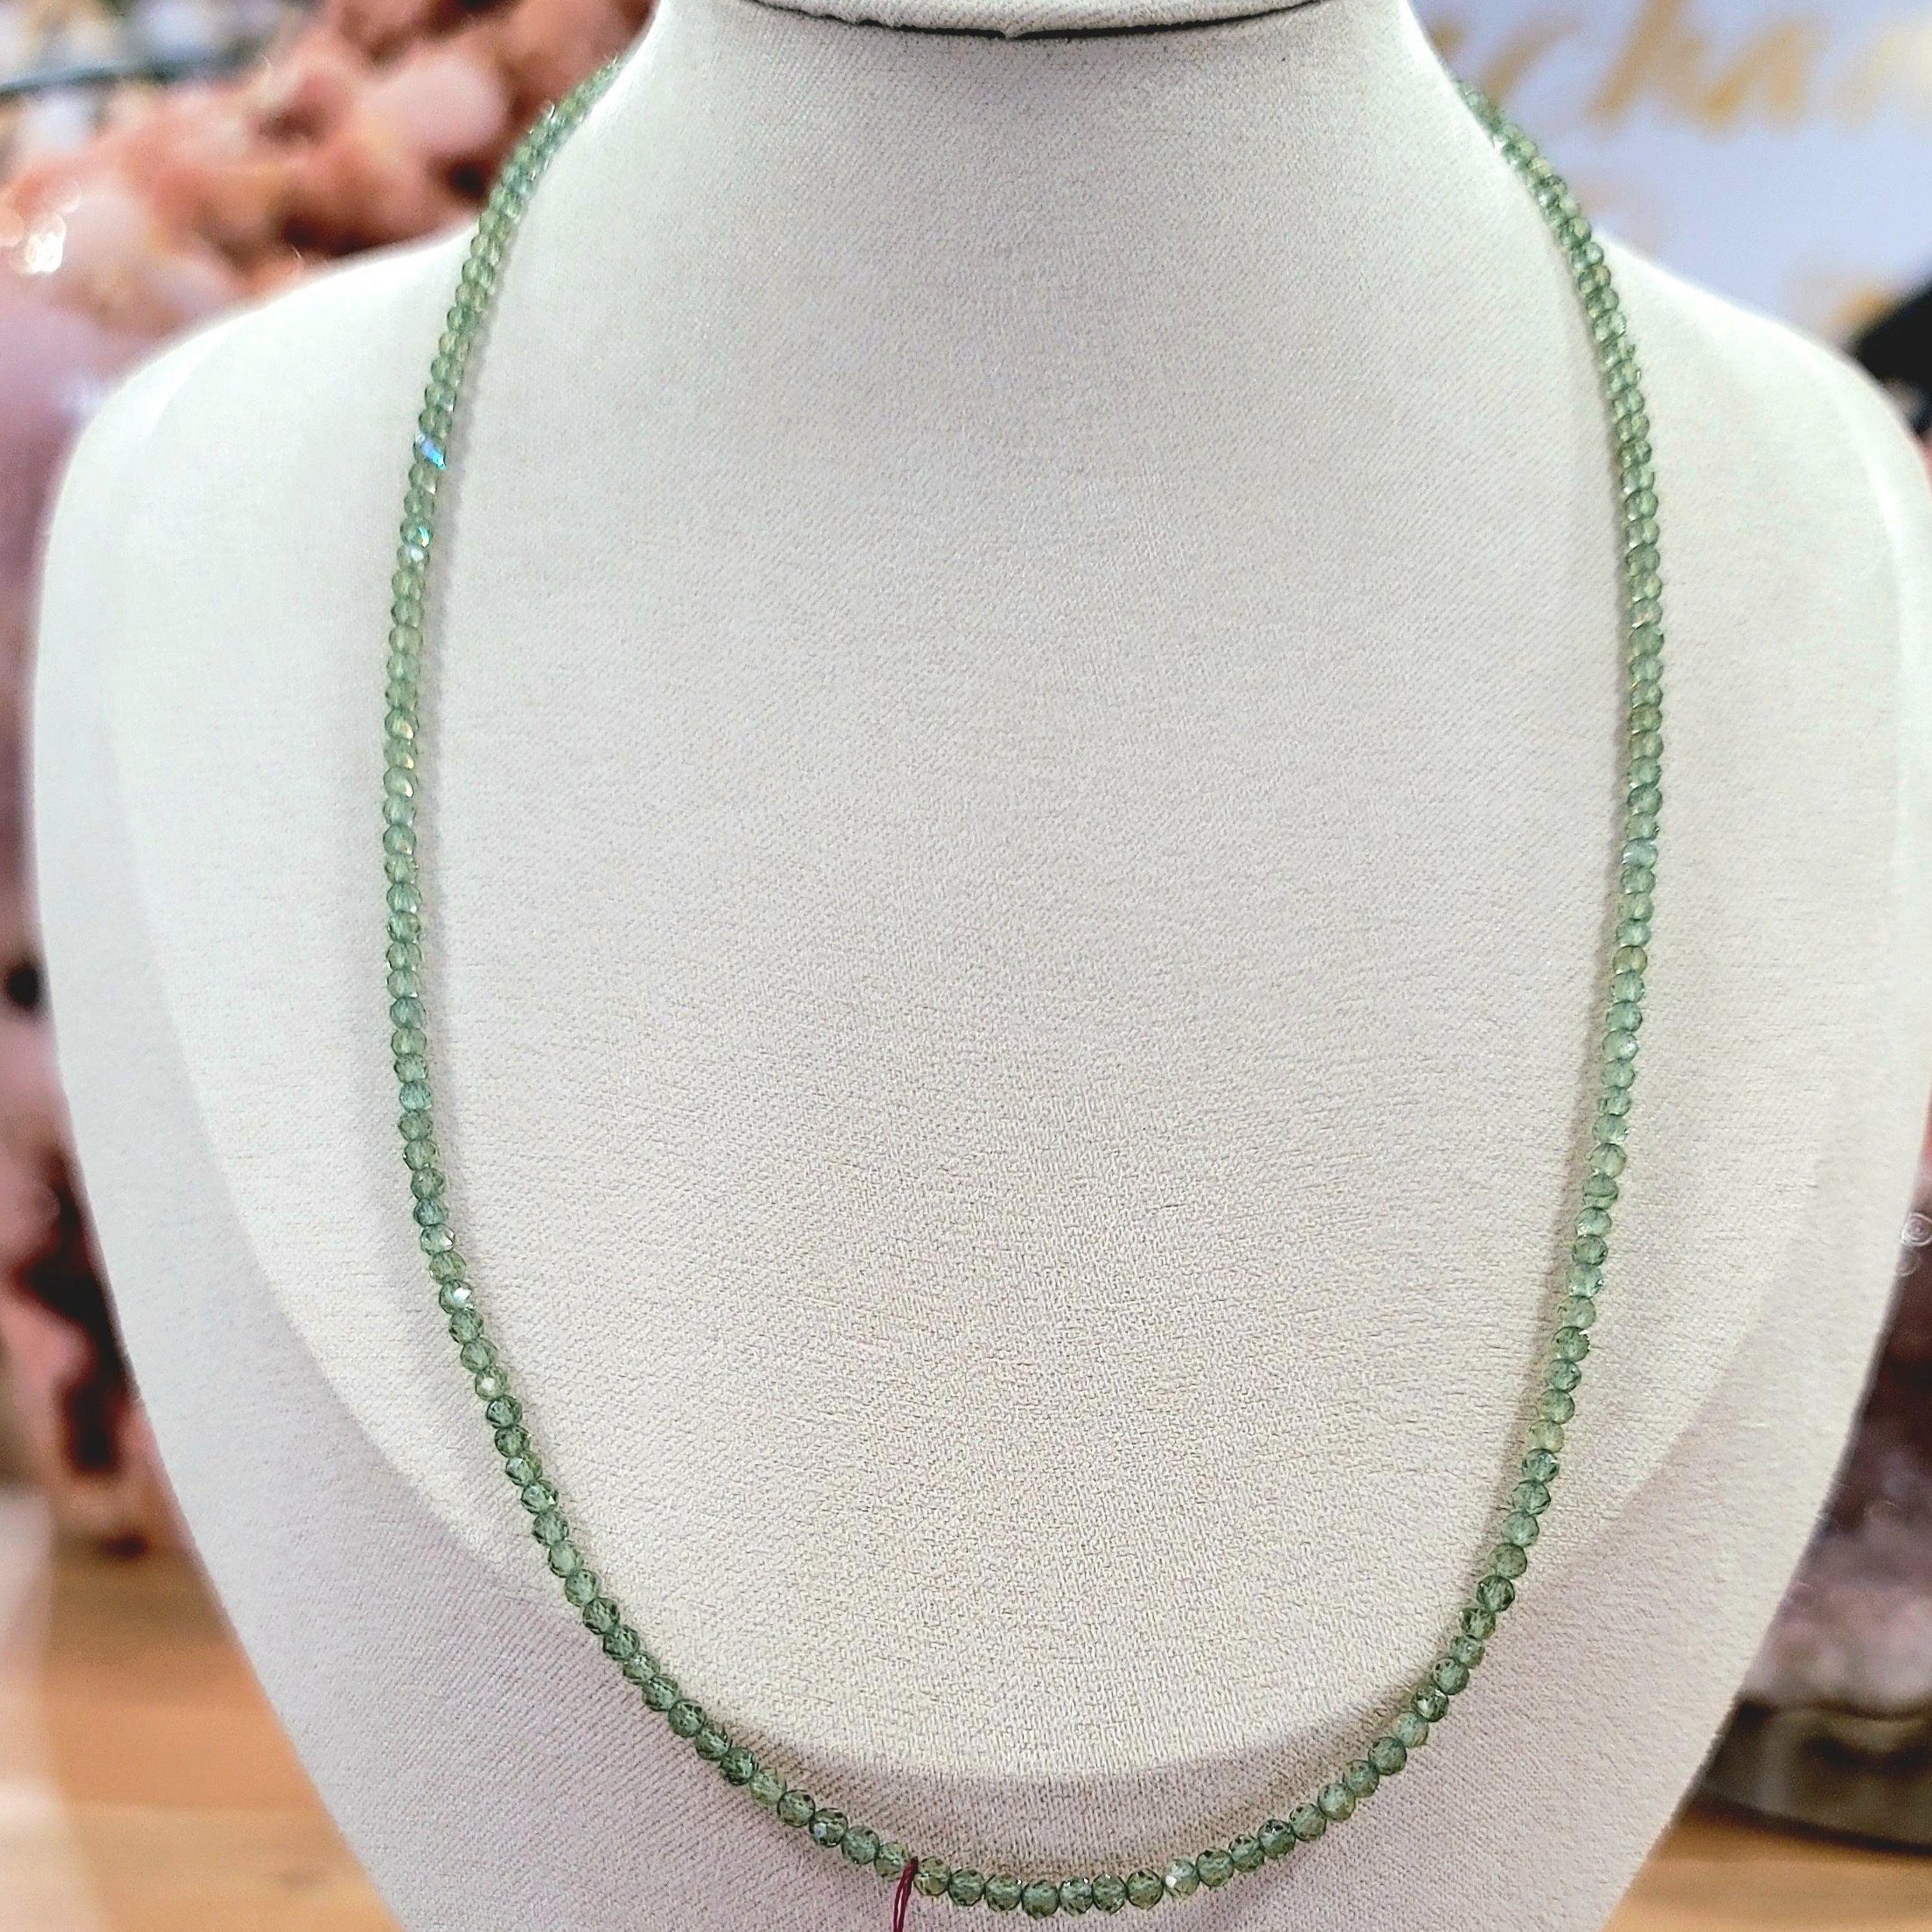 Green Apatite Micro Faceted Necklace for Emotional Balance, Logic and Stress Relief